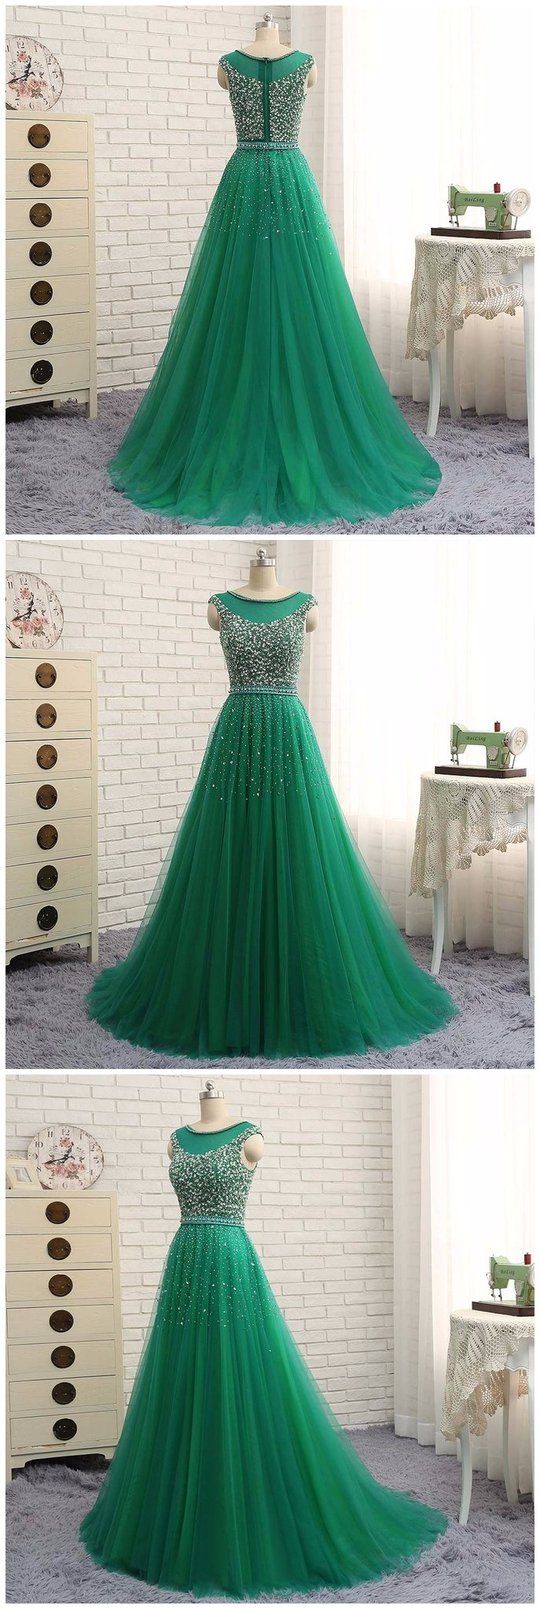 Beading Long Prom Dresses Tulle A-line Evening Formal Dresses M6230